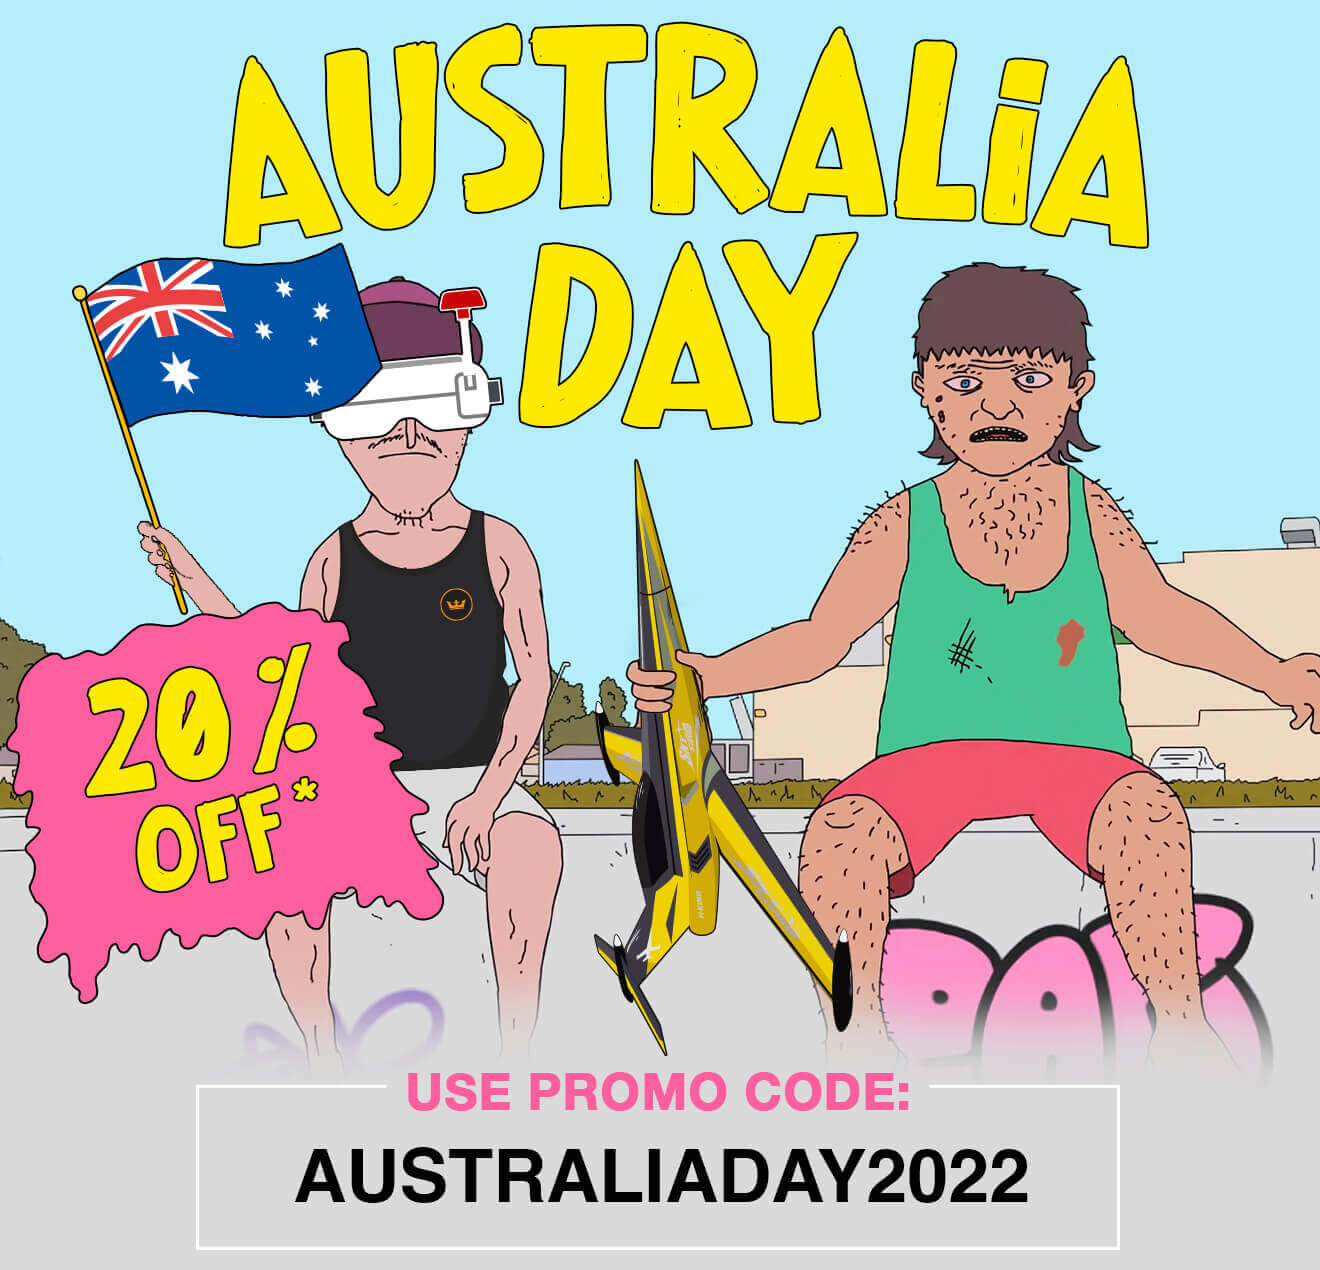 [AUSTRALIA DAY SALE]: Enjoy 20% Off Your Purchase